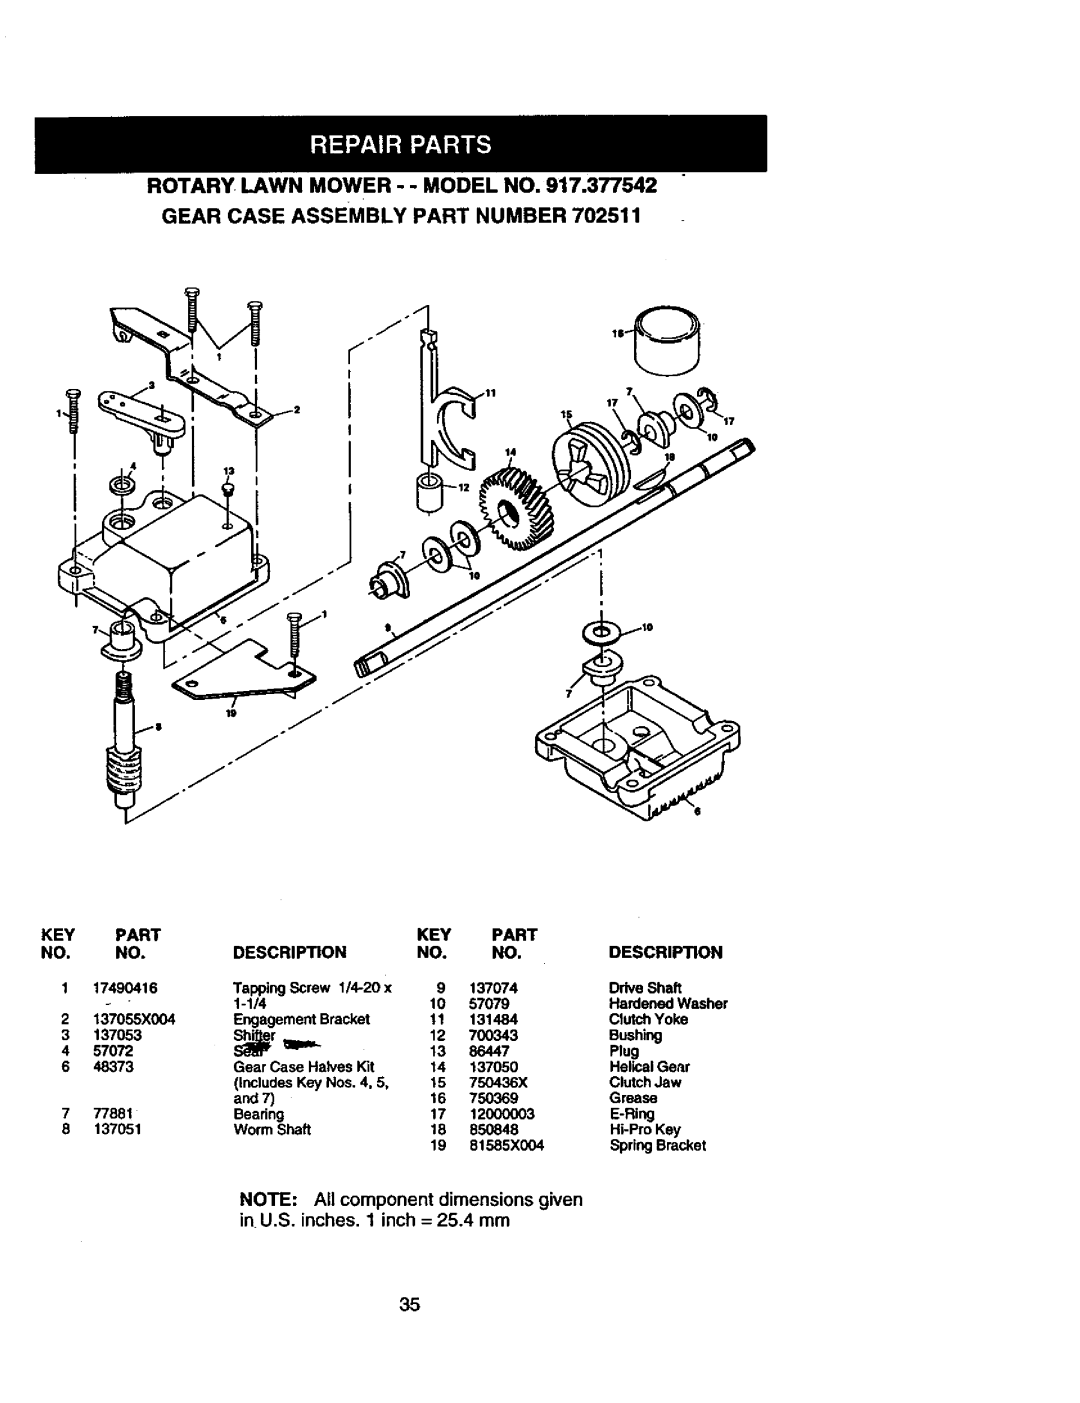 Craftsman 917.377542 owner manual Rotary Lawn Mower - - Model No, Gear Case Assembly Part Number 